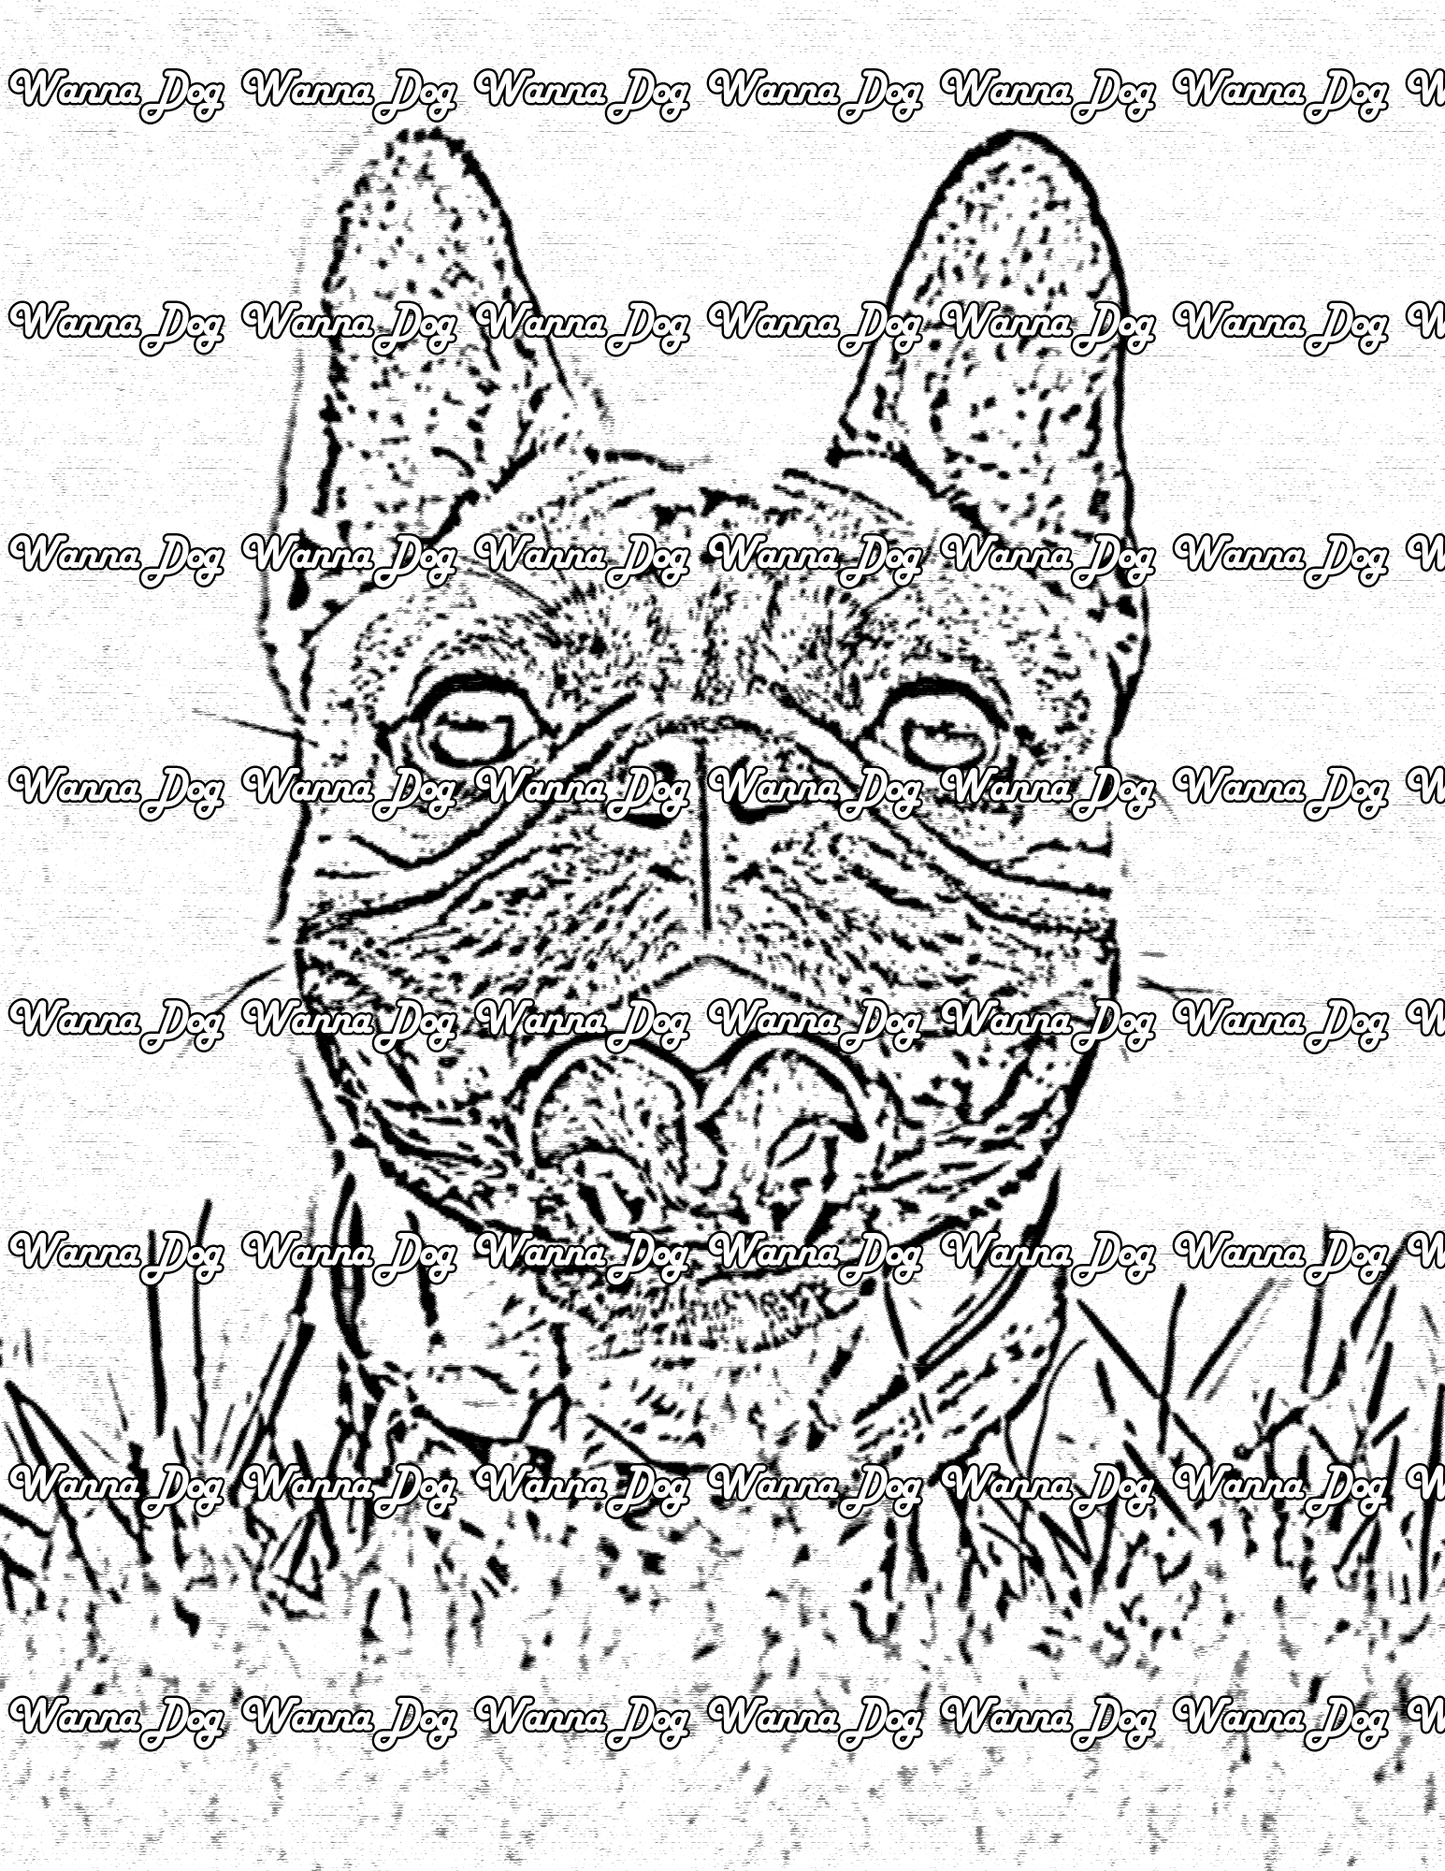 French Bulldog Coloring Page of a French Bulldog with their head popping their head up